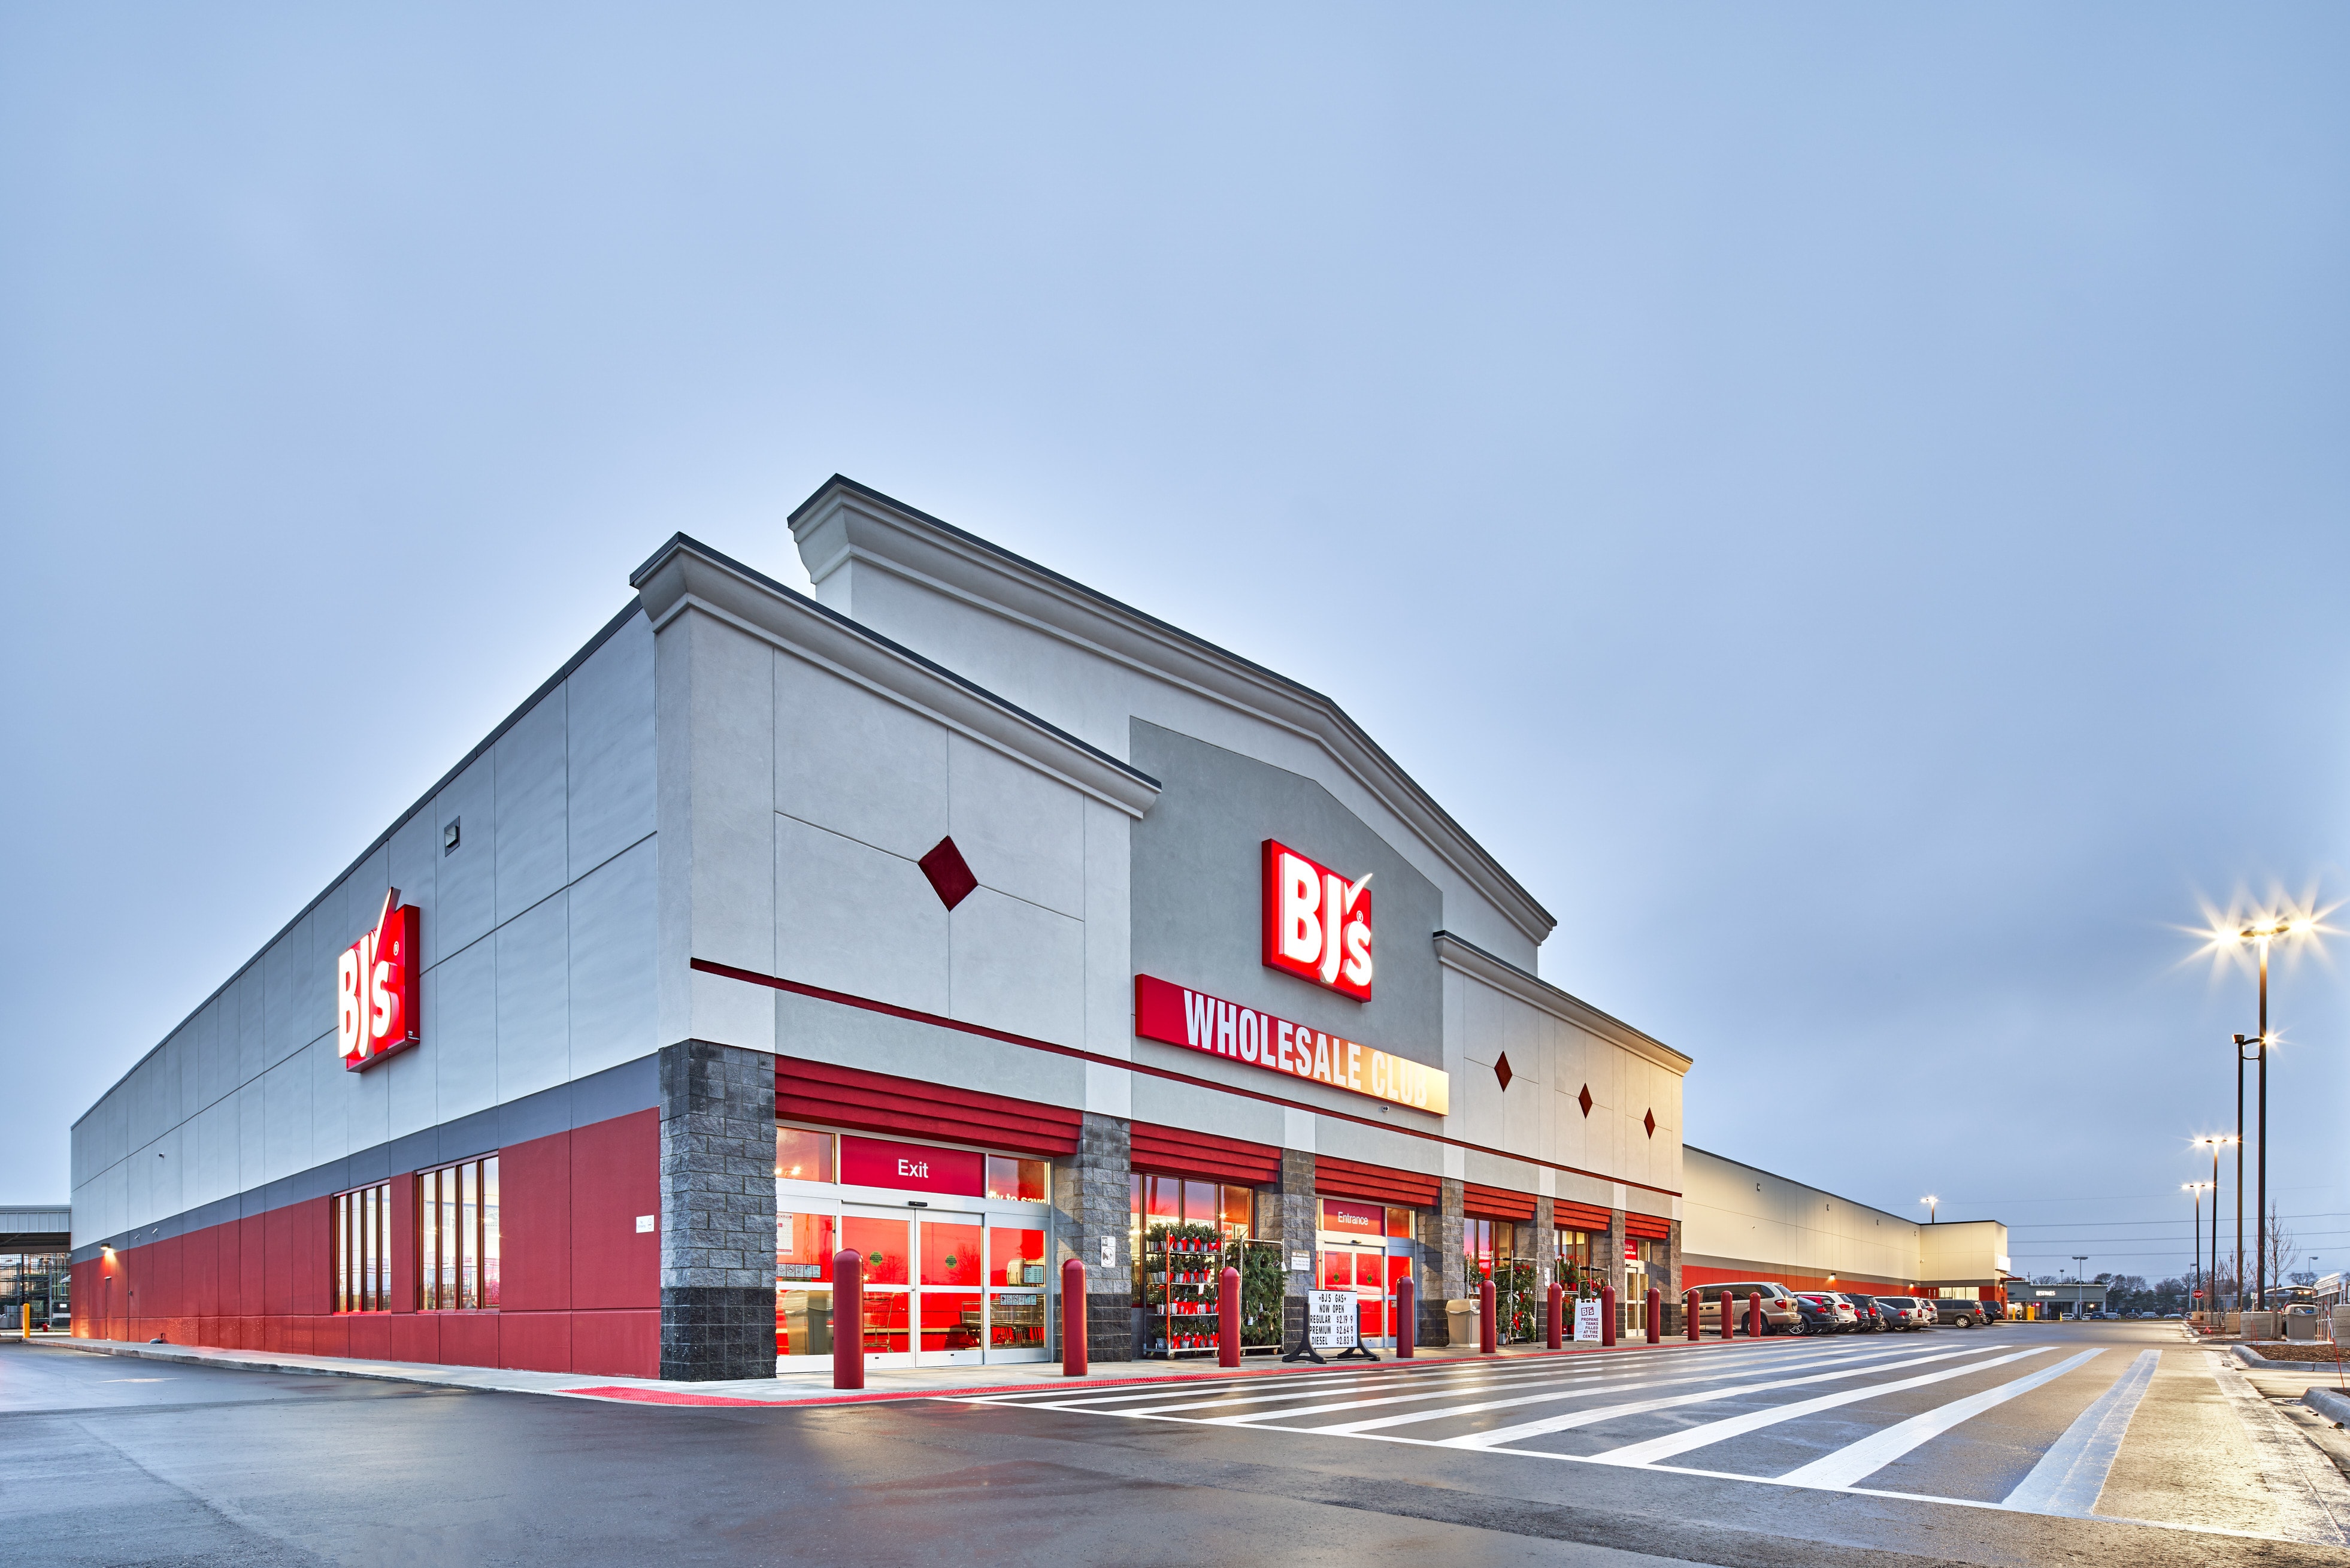 KIRCO MANIX Completes Construction of BJ's Wholesale Clubs